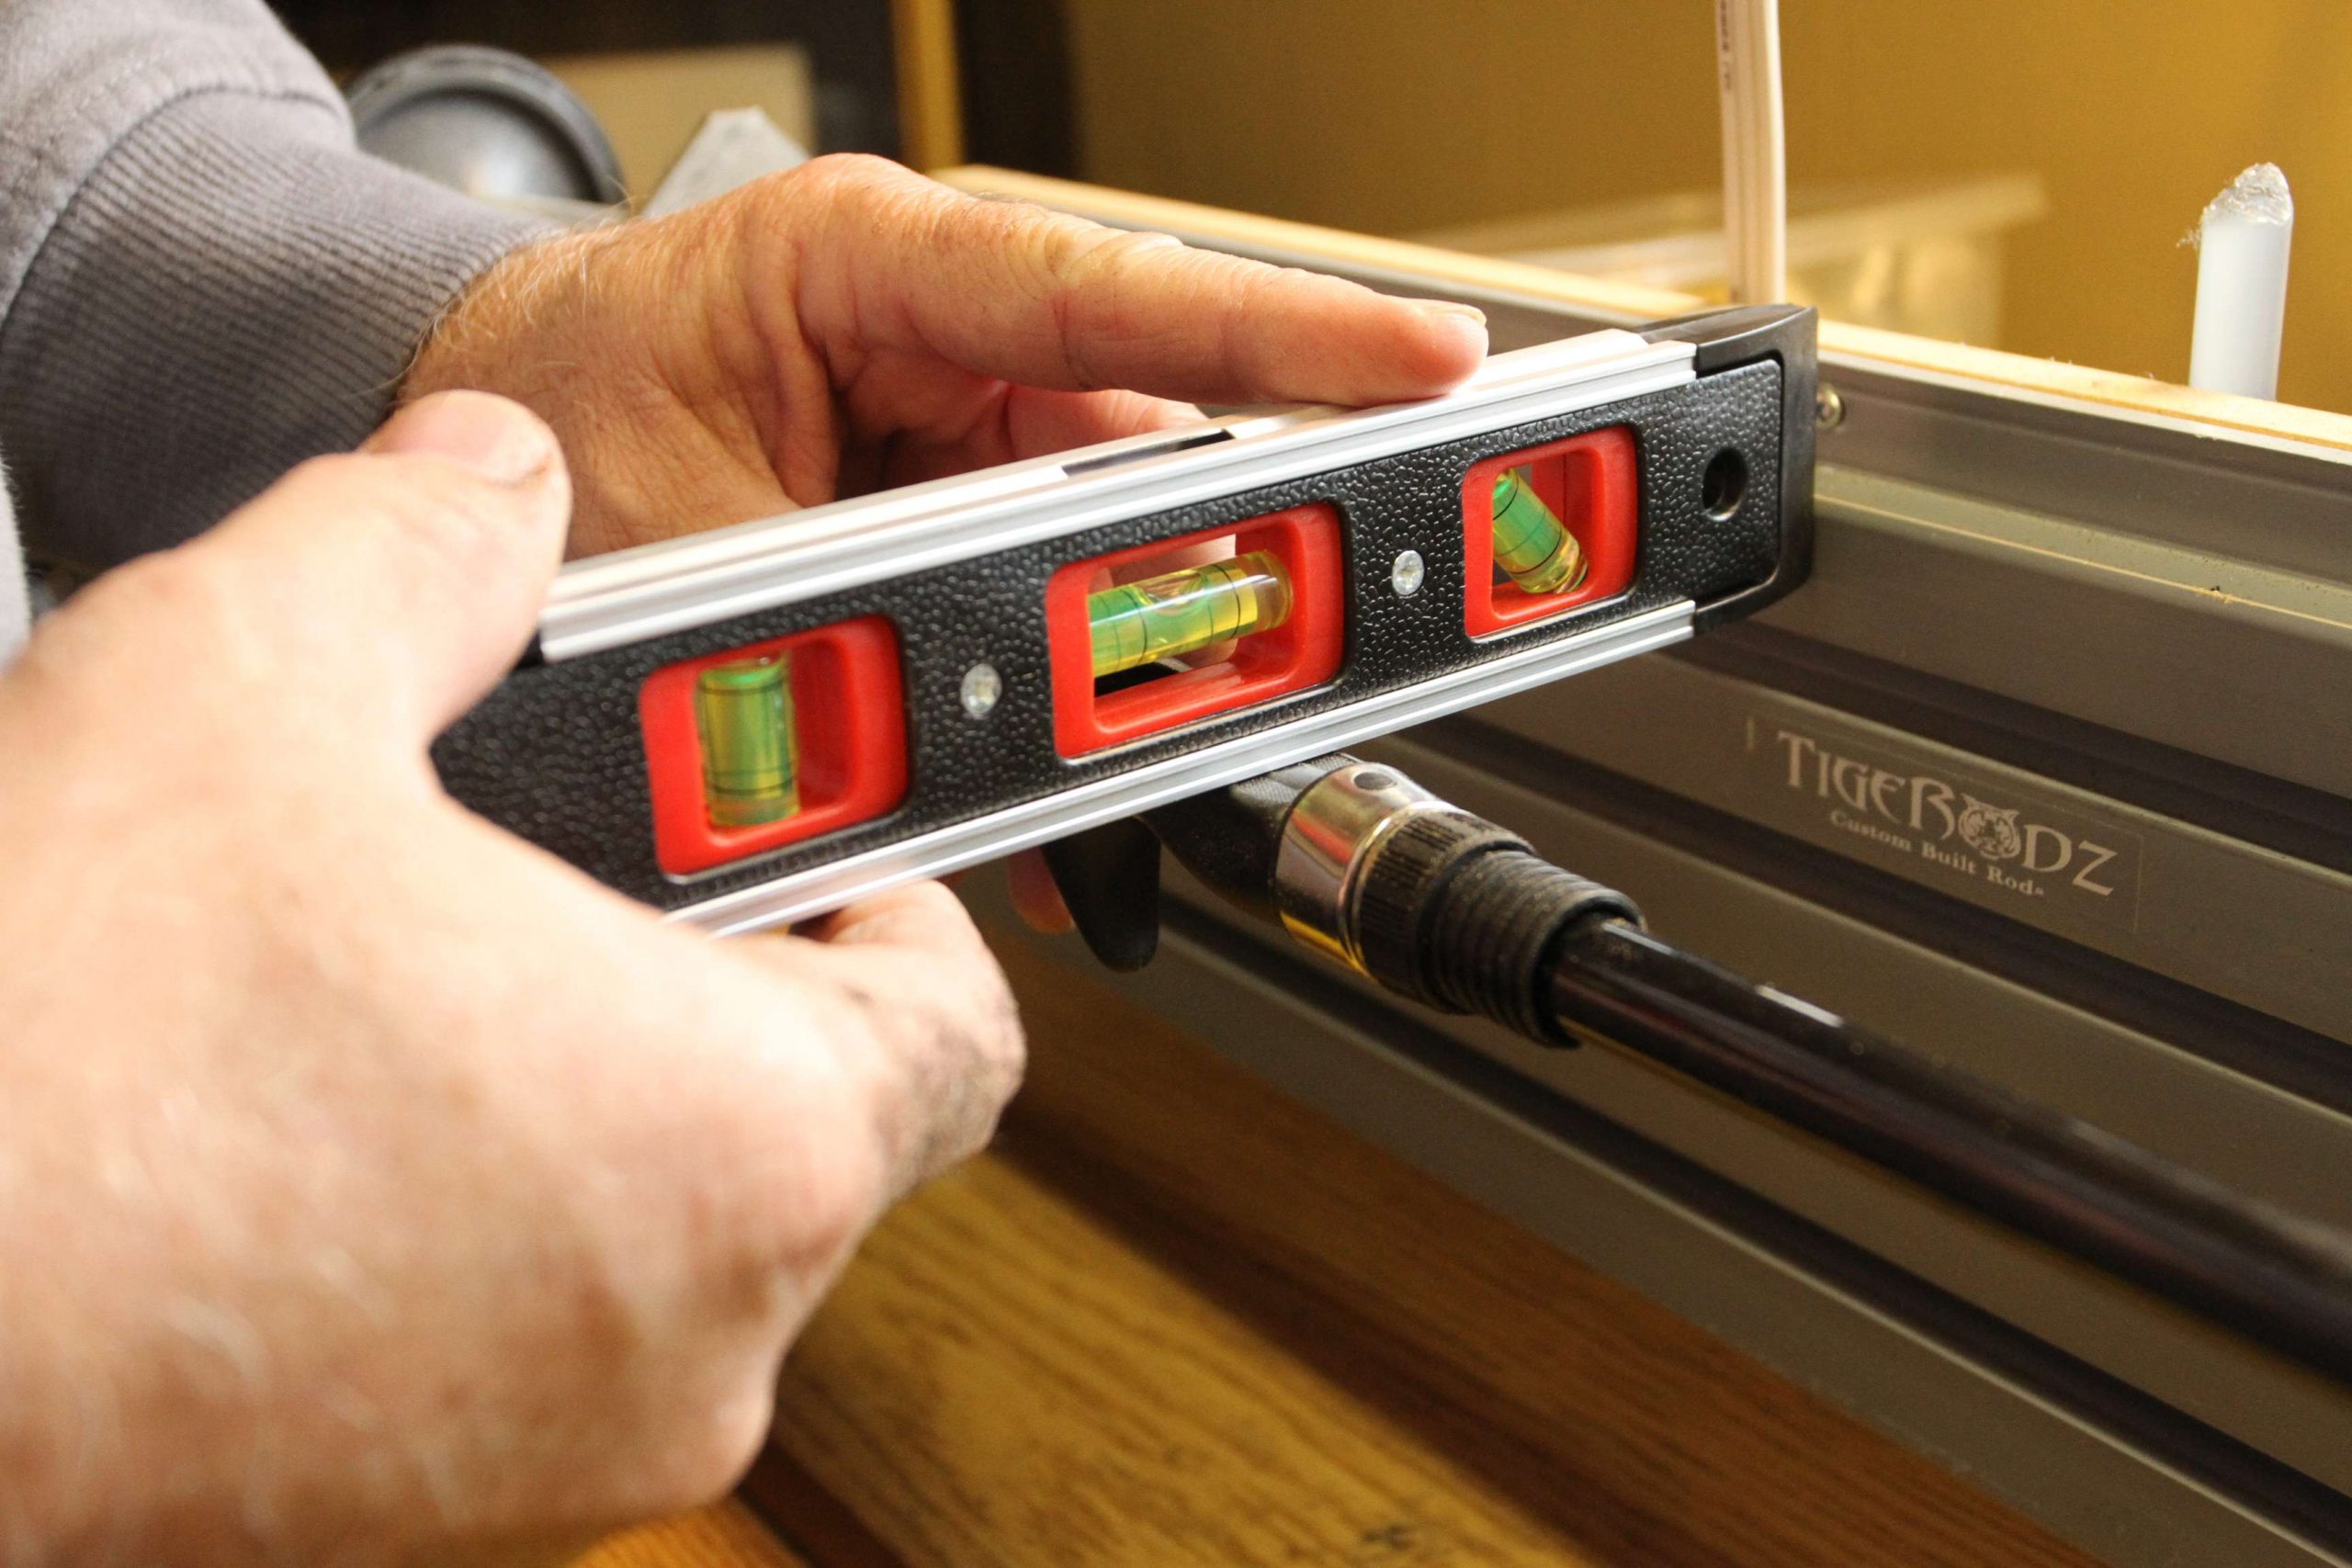 The rod is then placed back on the wrapping machine and he levels the reel seat perpendicular to the spline, which is marked by the white line just to the right of the level. 